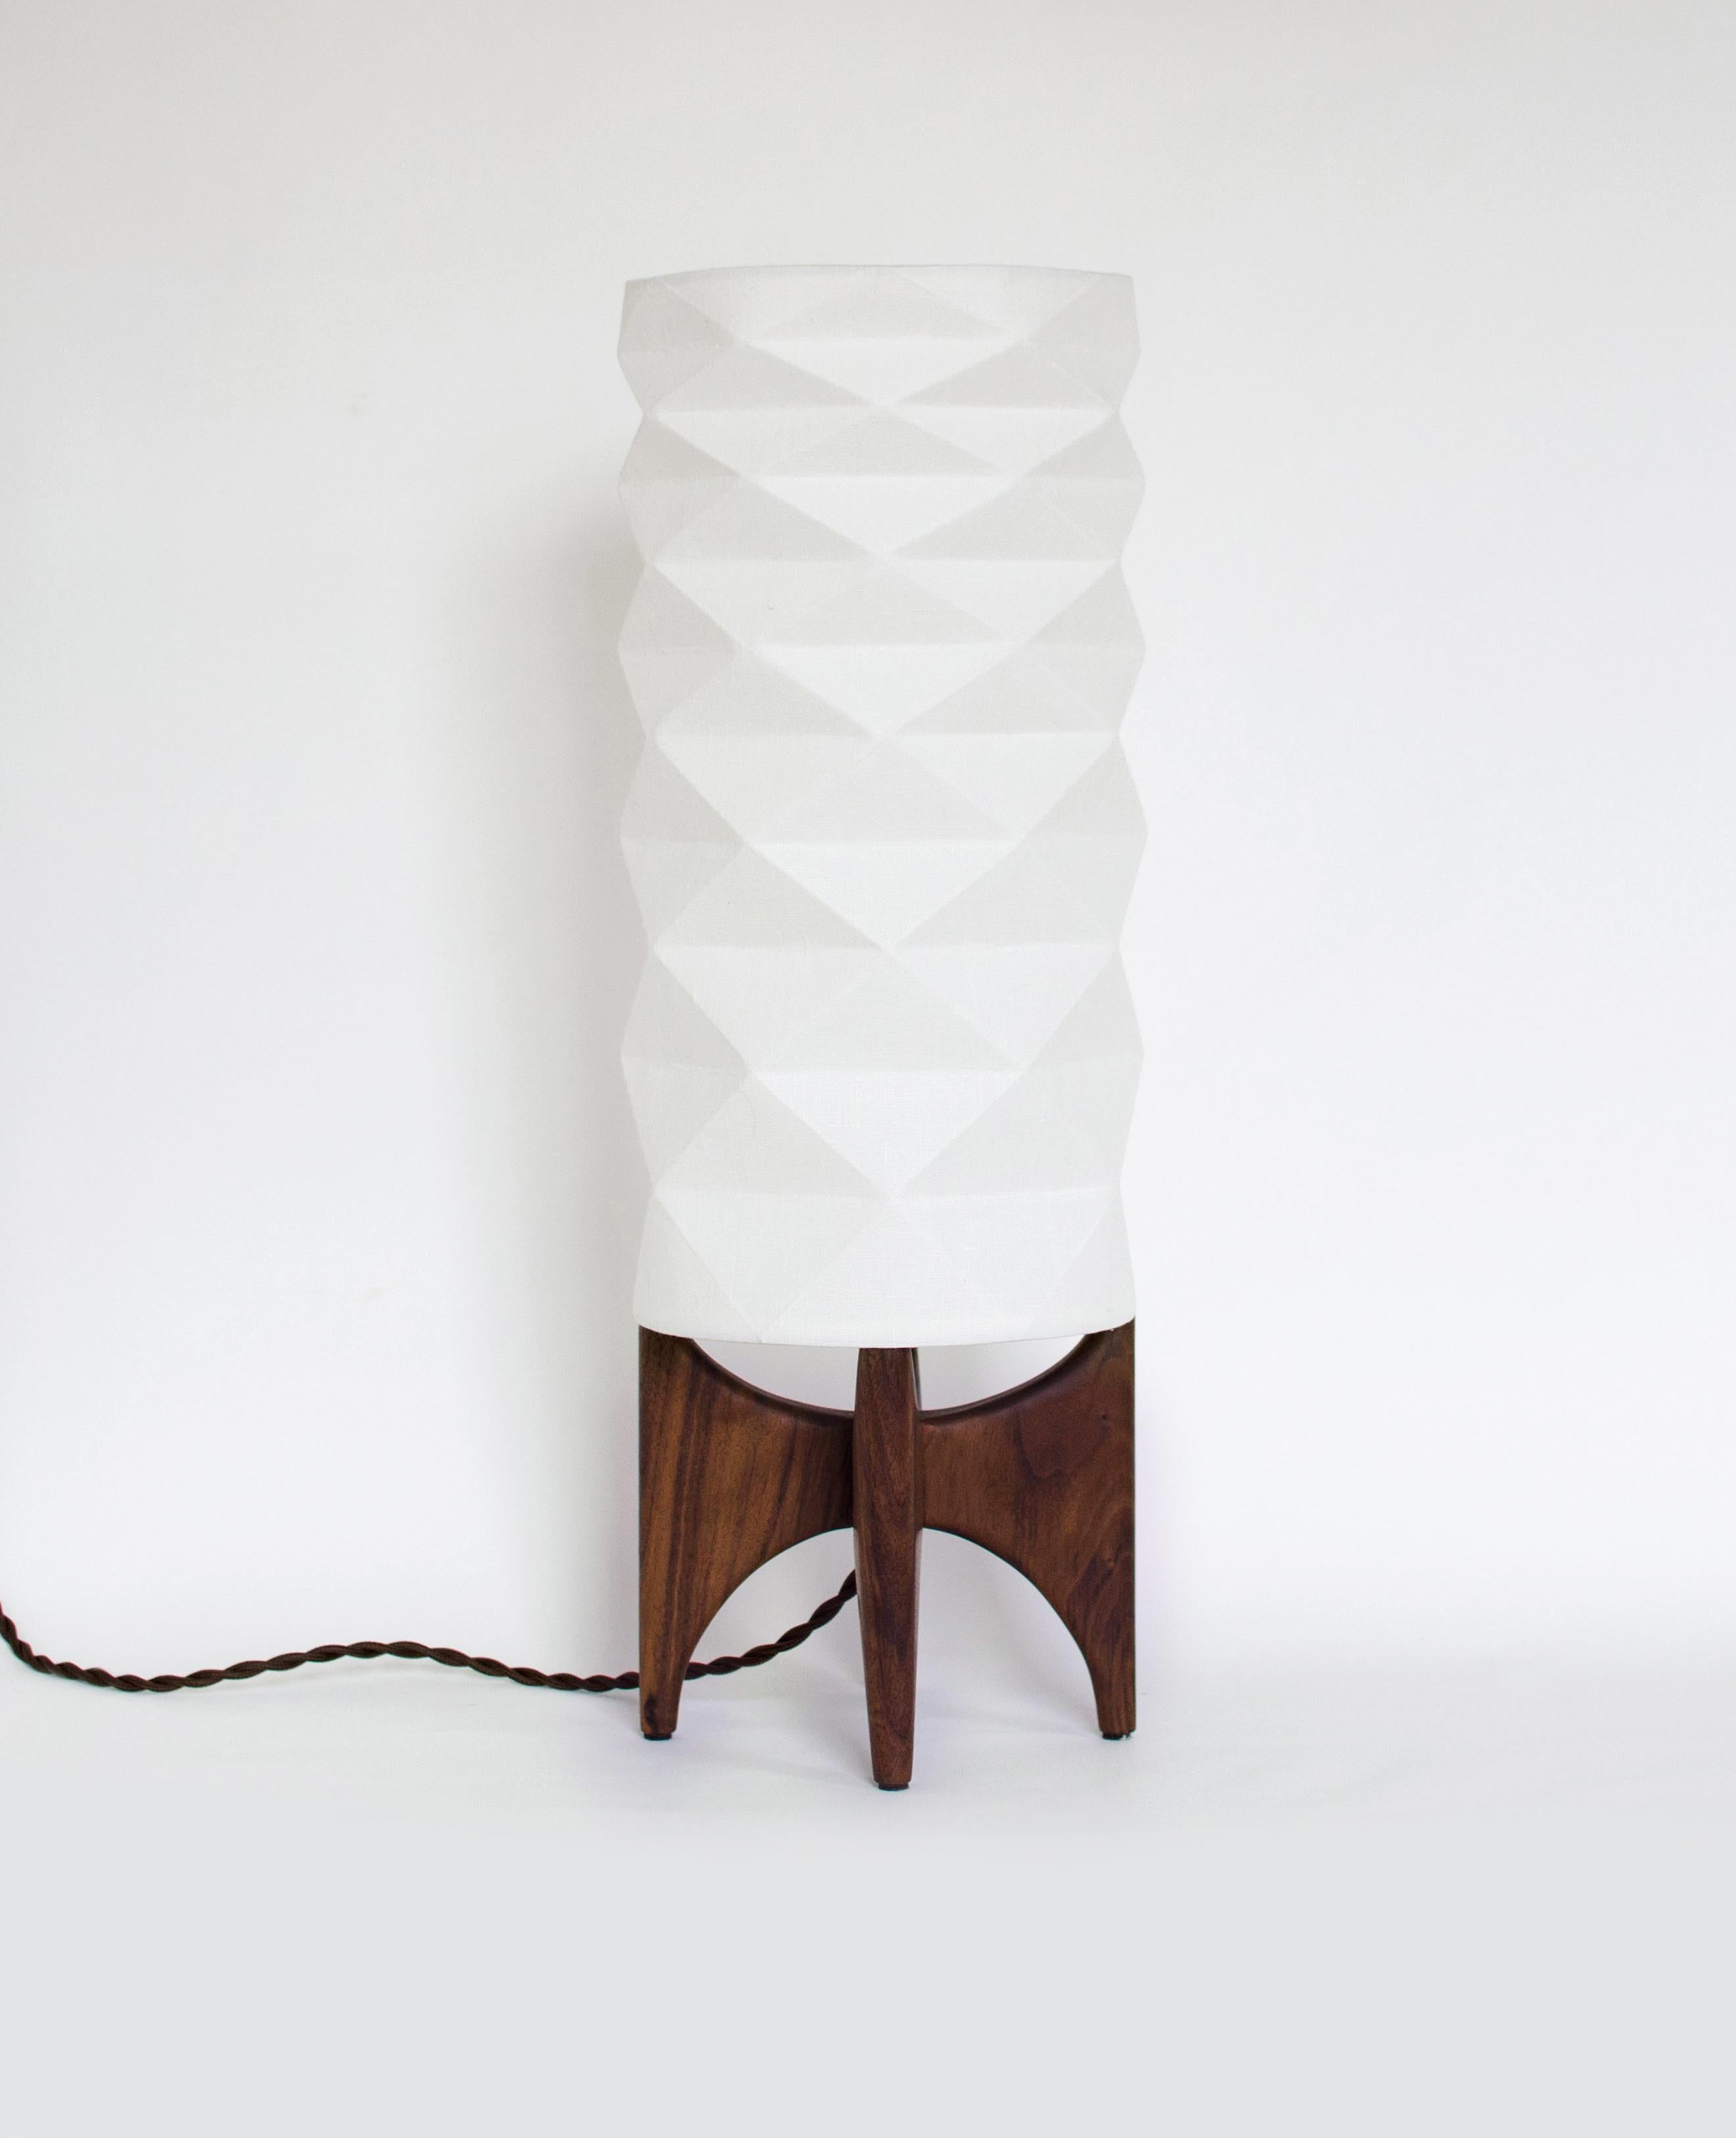 The TōRō lamp is a unique table lamp that will bring to your interior a modern-retro style functional piece. The origami-inspired lampshade is made of laminated linen fabric providing a bright, yet soft ambient light and showing the beautiful